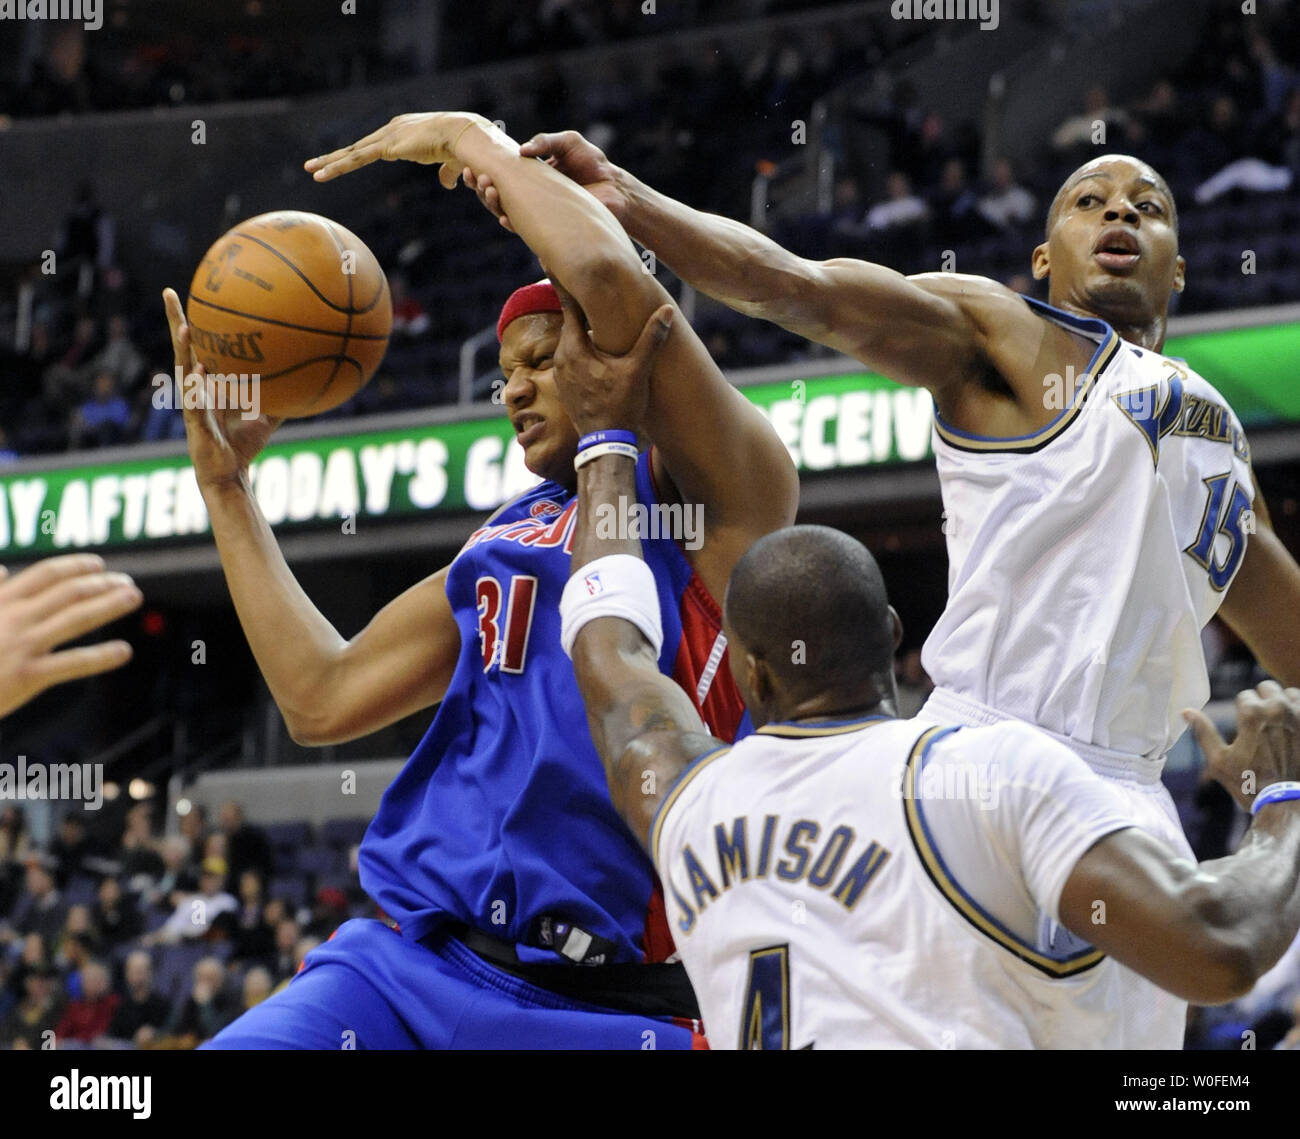 Detroit Pistons Charlie Villanueva (31) is fouled by Washington Wizards Antawn Jamison (4) and Randy Foye (15) during the first period at the Verizon Center in Washington on January 12, 2010. UPI/Alexis C. Glenn Stock Photo